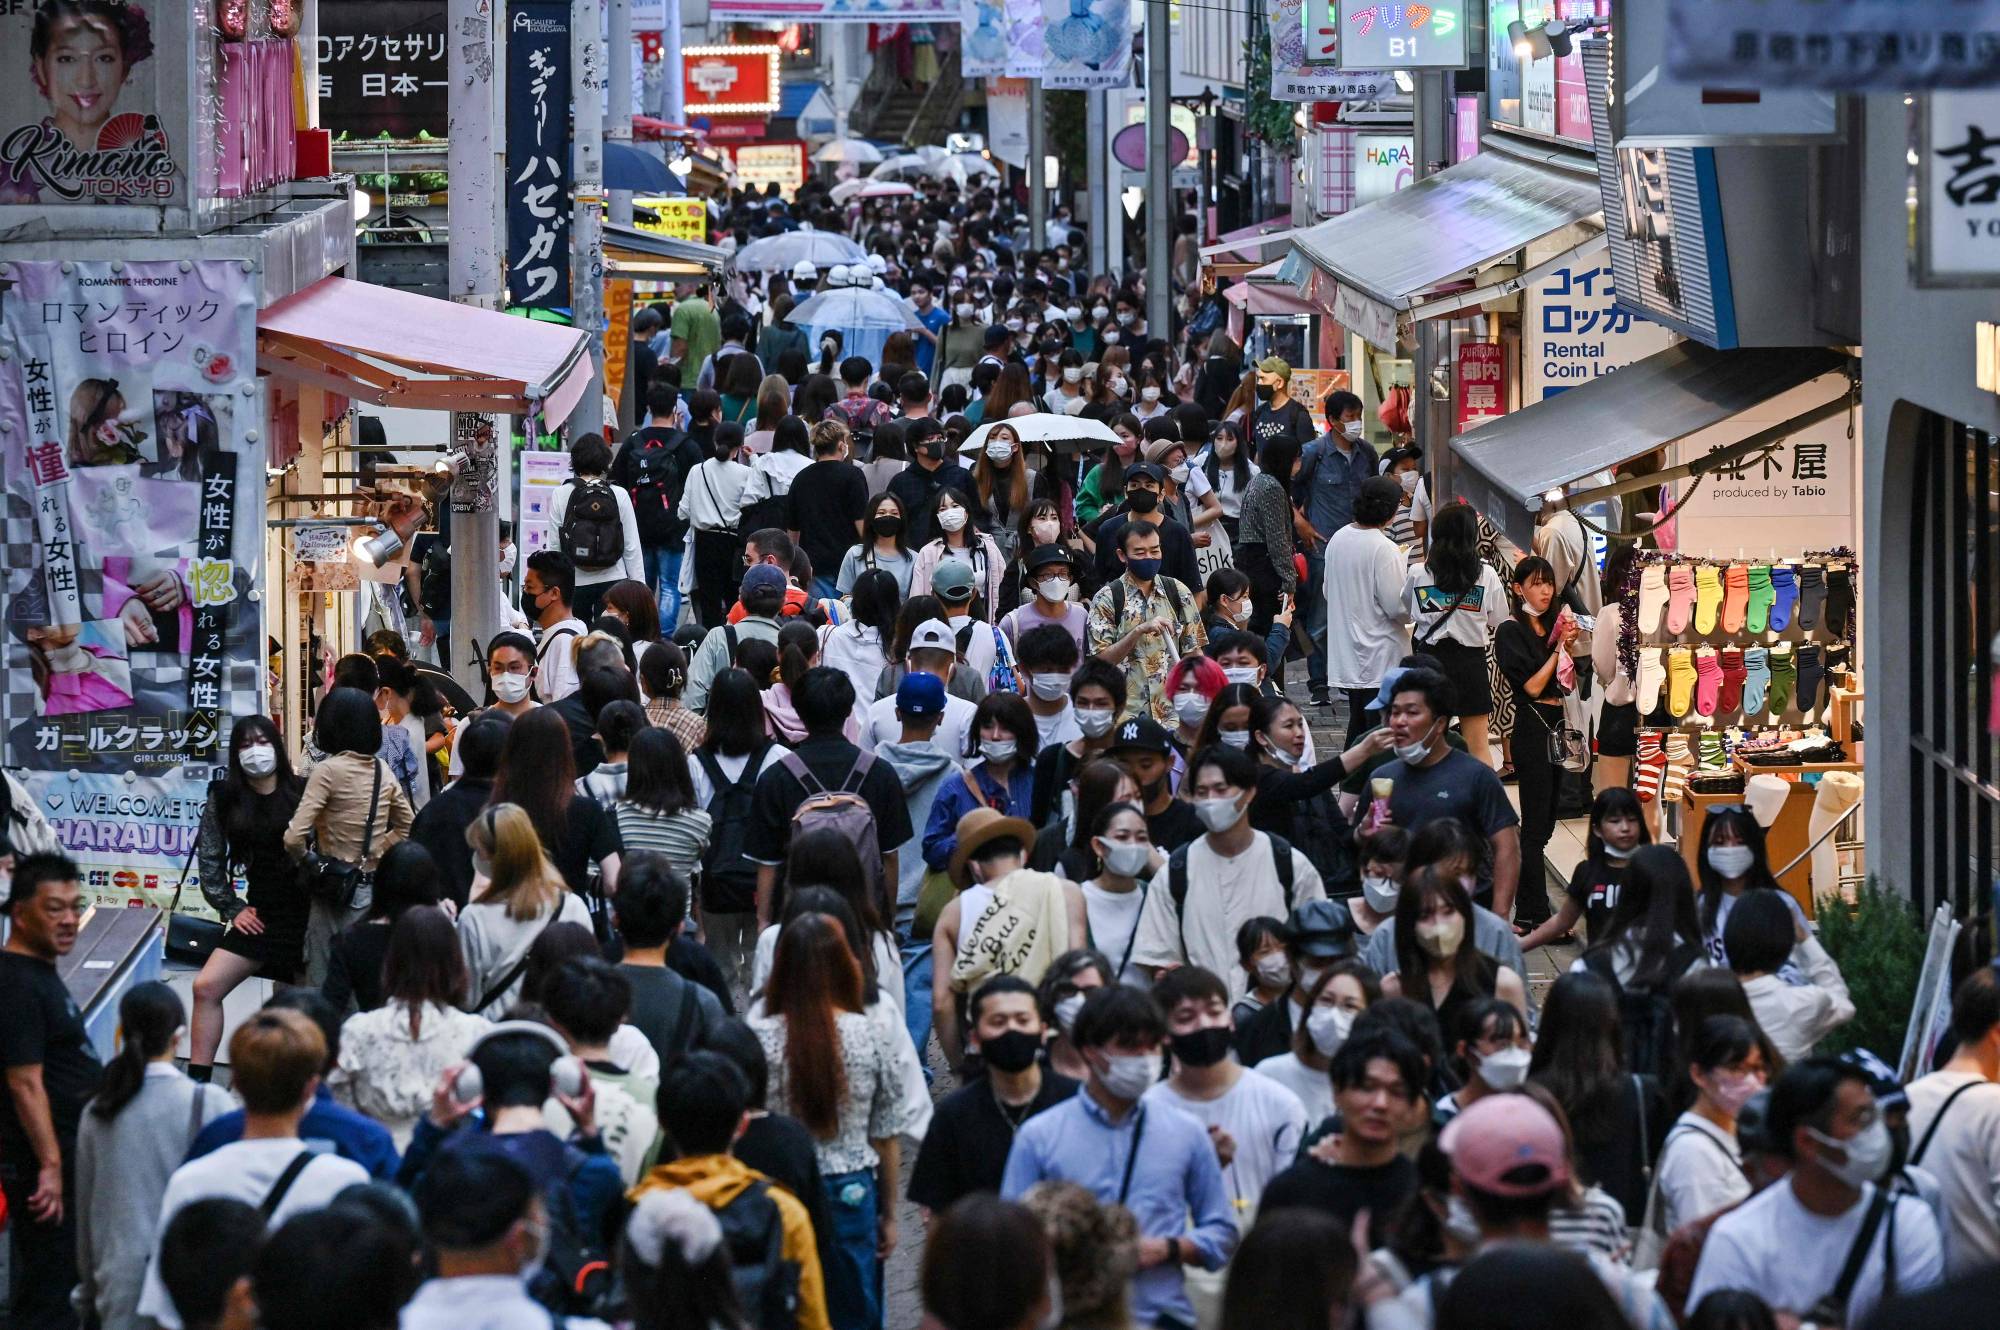 Tokyo citizens may have developed COVID-19 herd immunity, say researchers